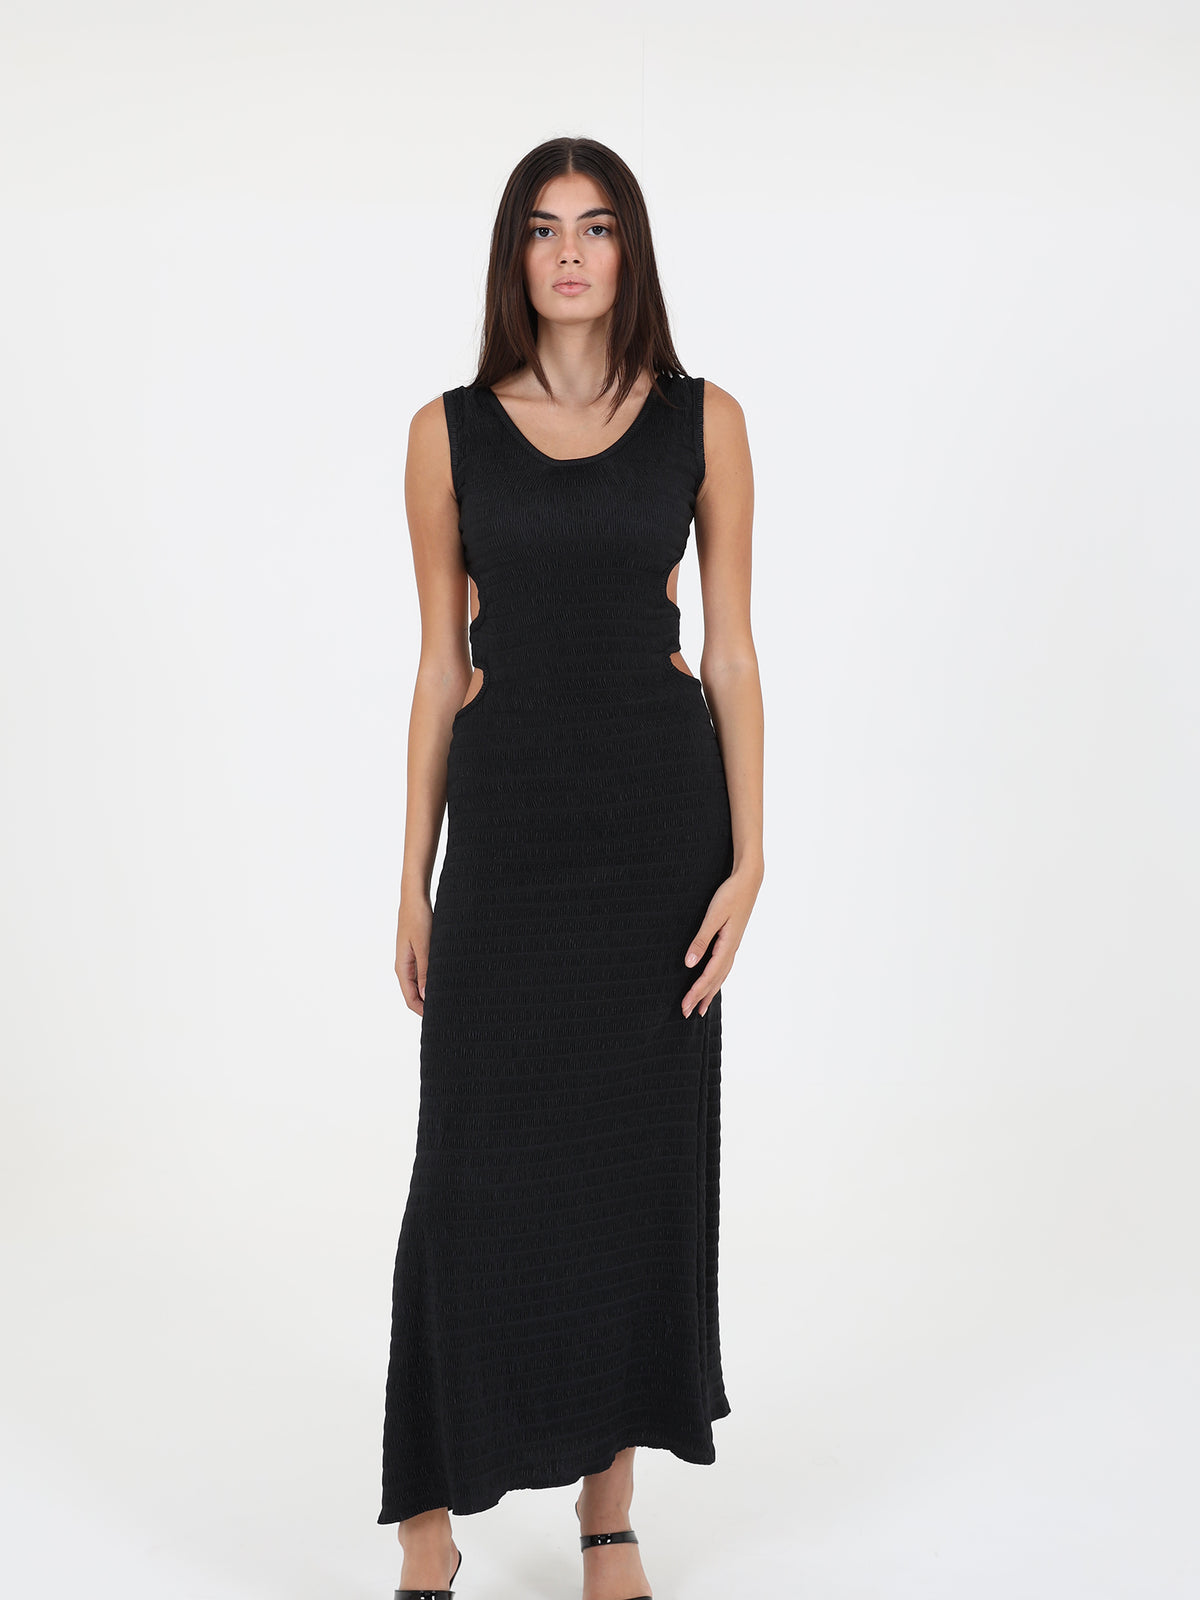 Textured Black Dress With Side Cut Outs